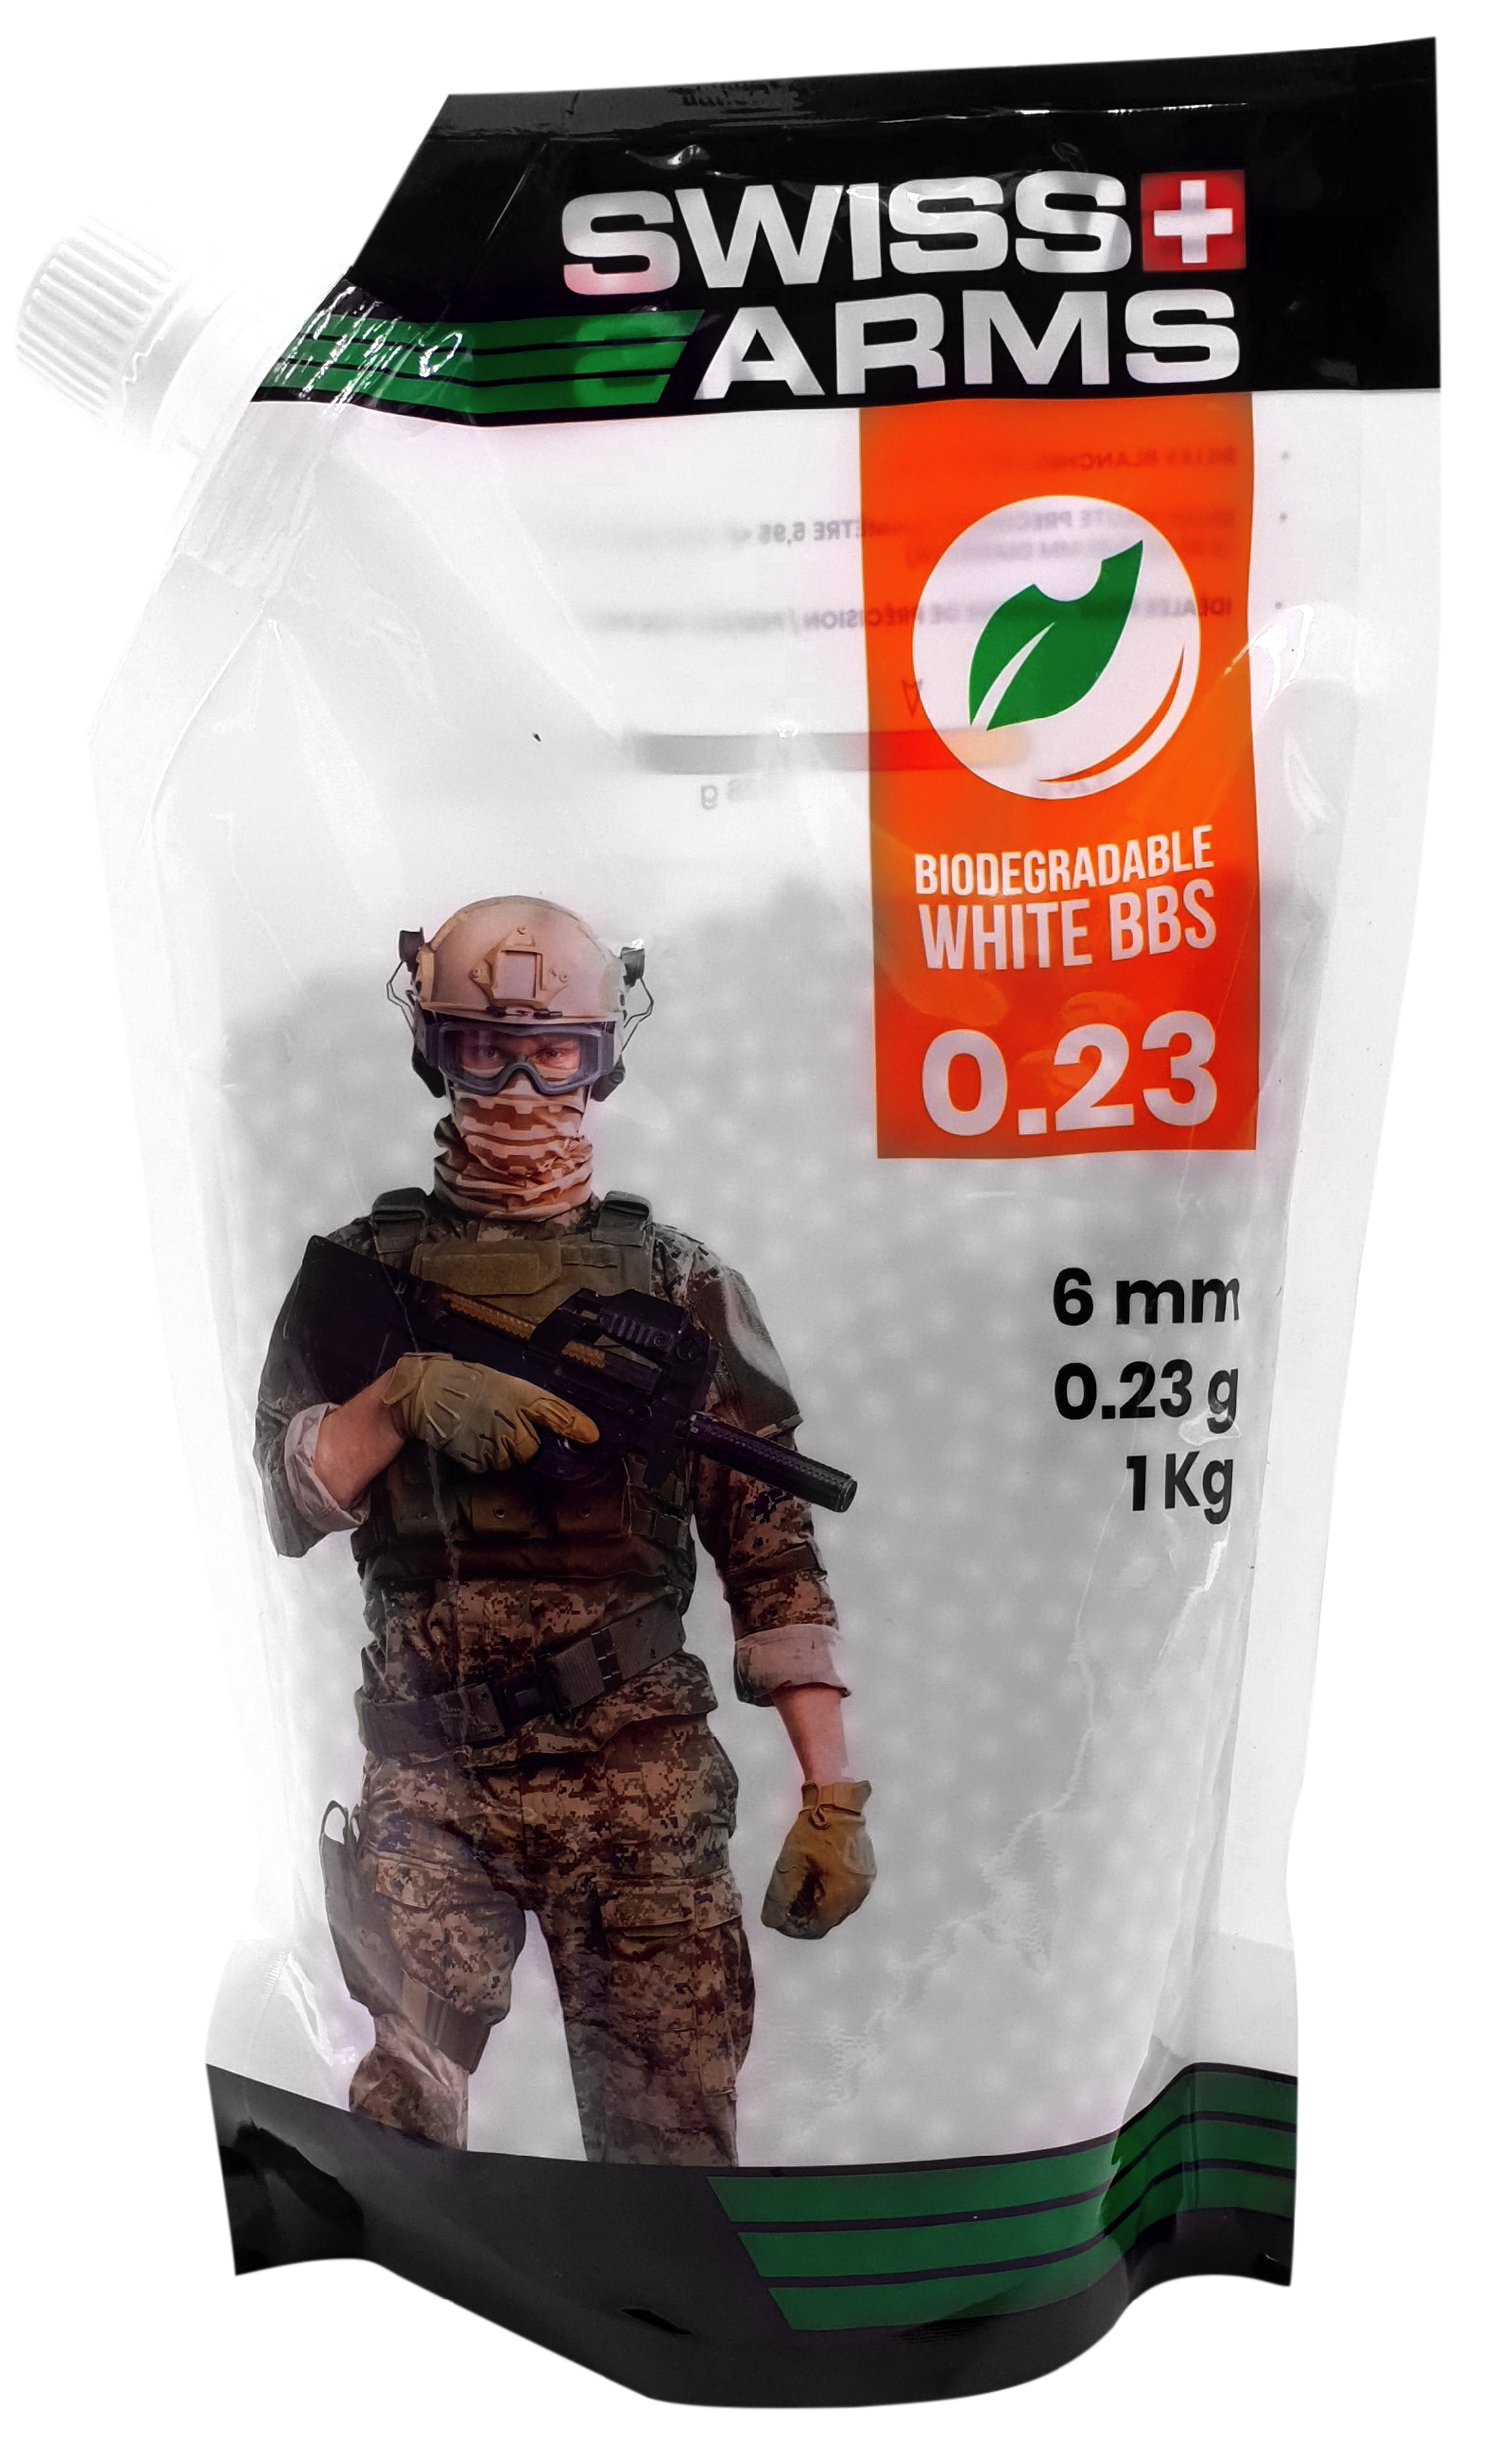 BBs Biodegradable SWISS ARMS White 0.23g 1kg Bag with pouring cap/C12